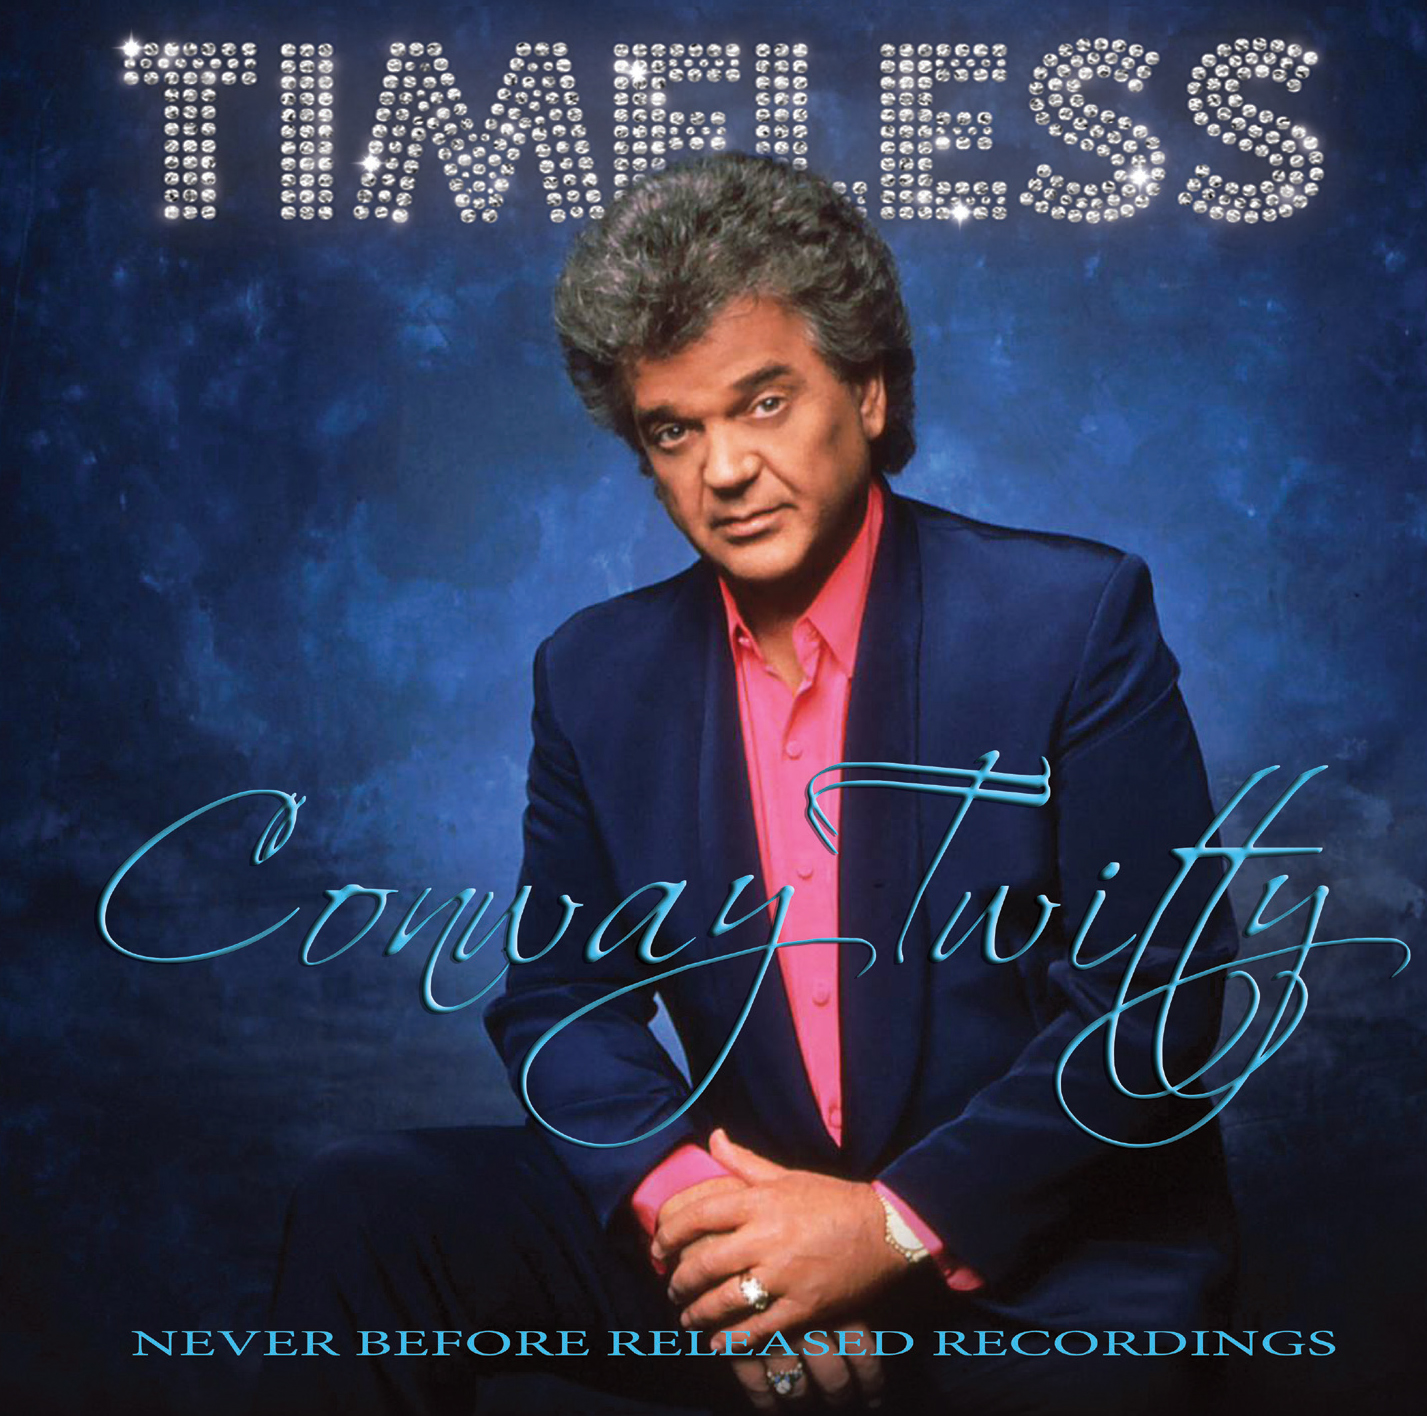 First Conway Twitty vinyl available in 26 years